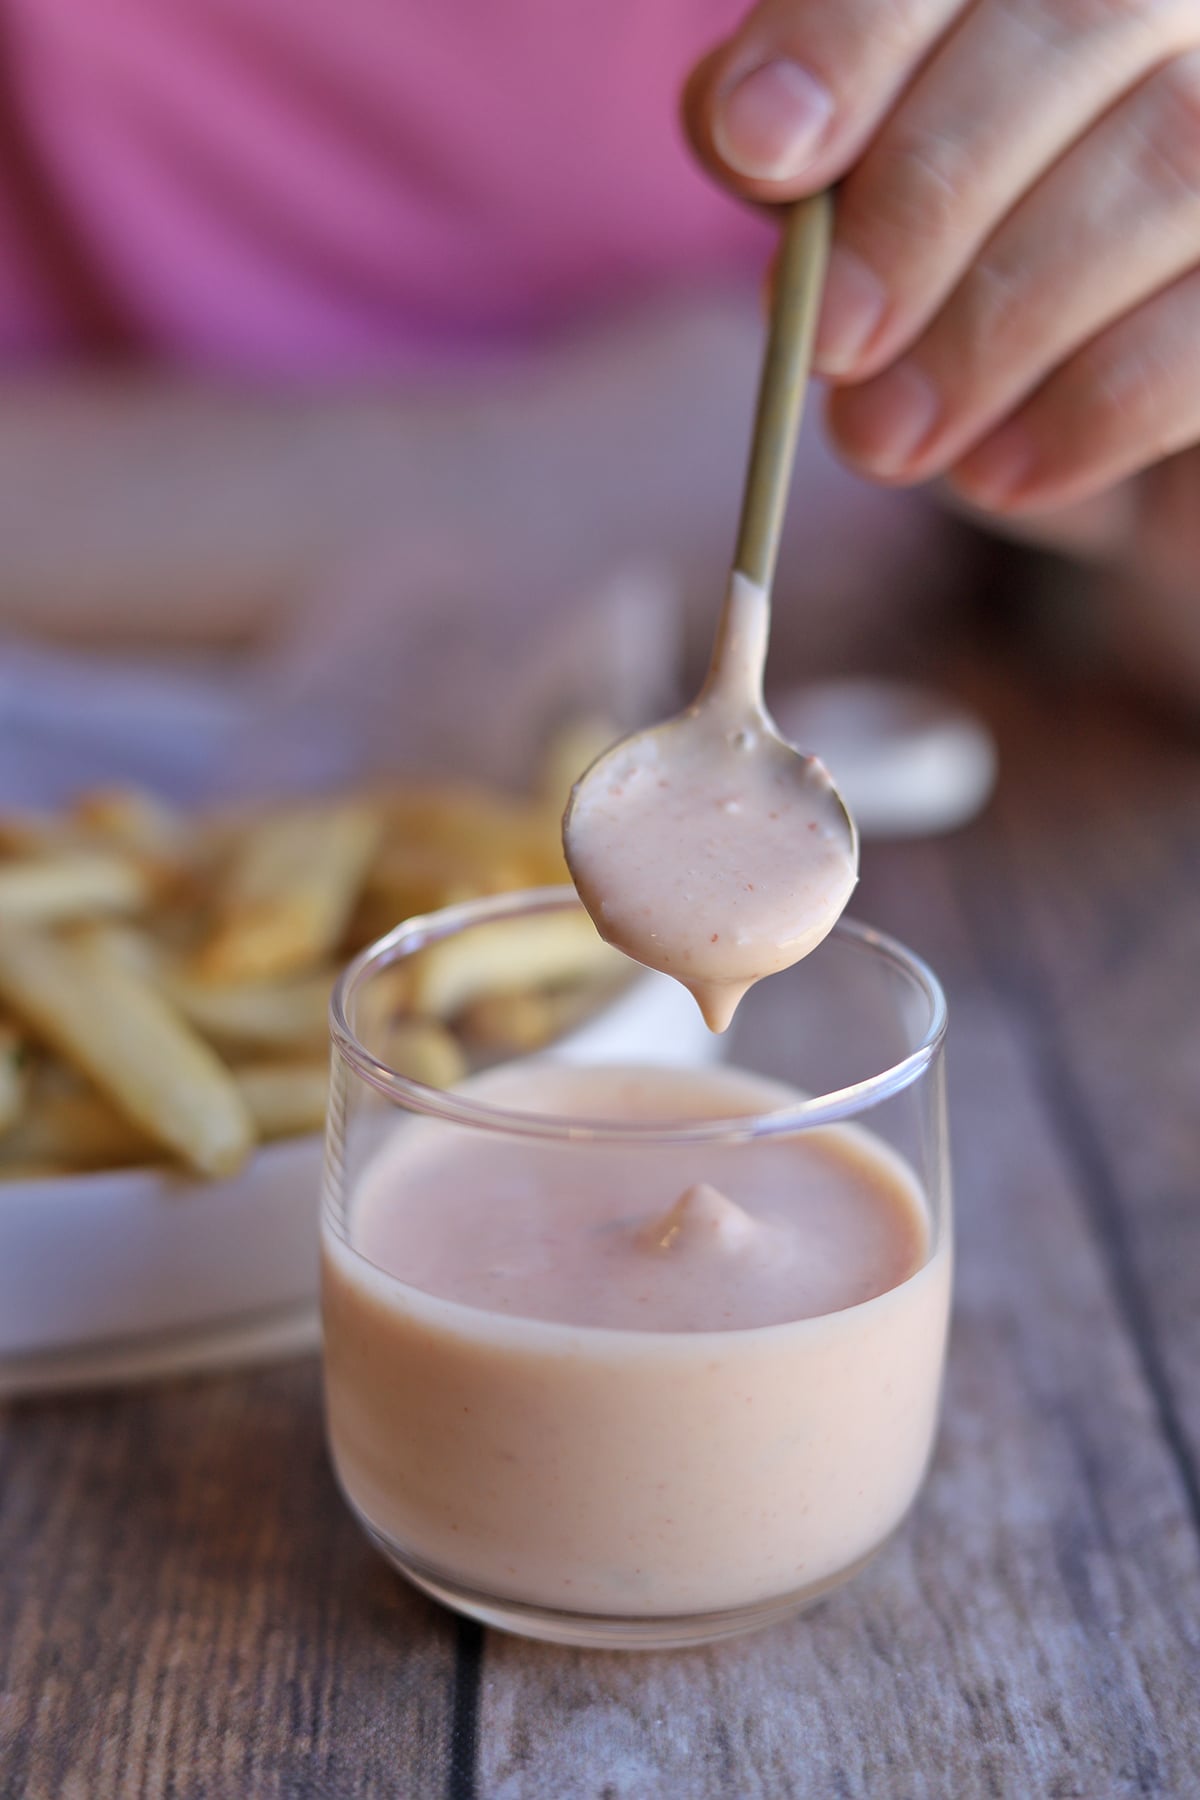 Sriracha mayo dipping off of spoon into glass.